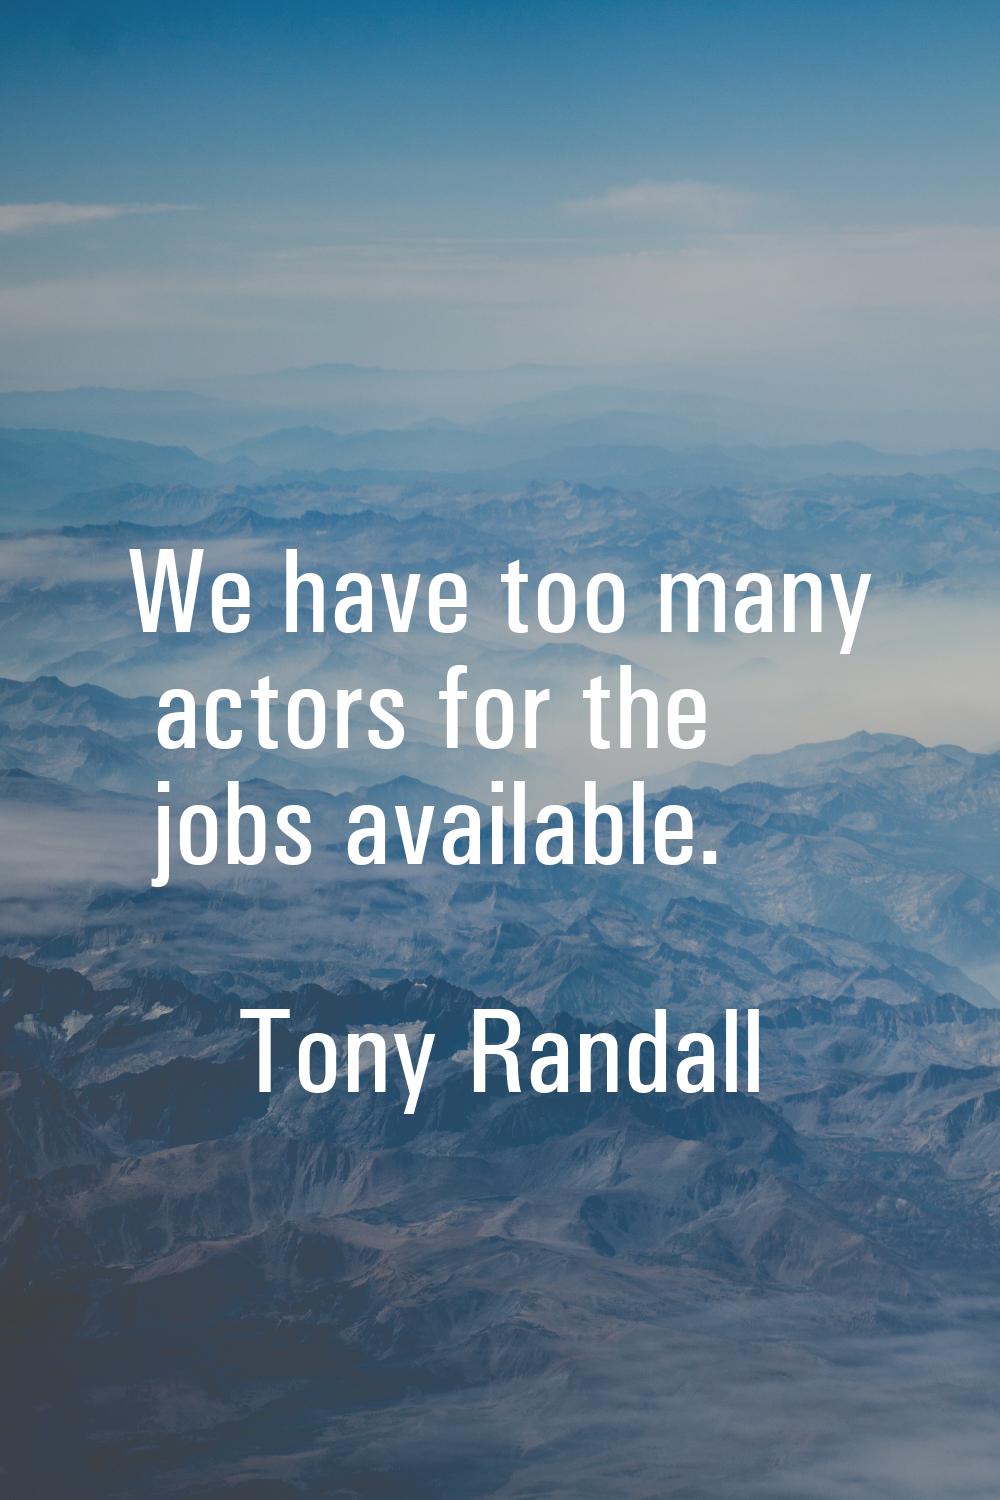 We have too many actors for the jobs available.